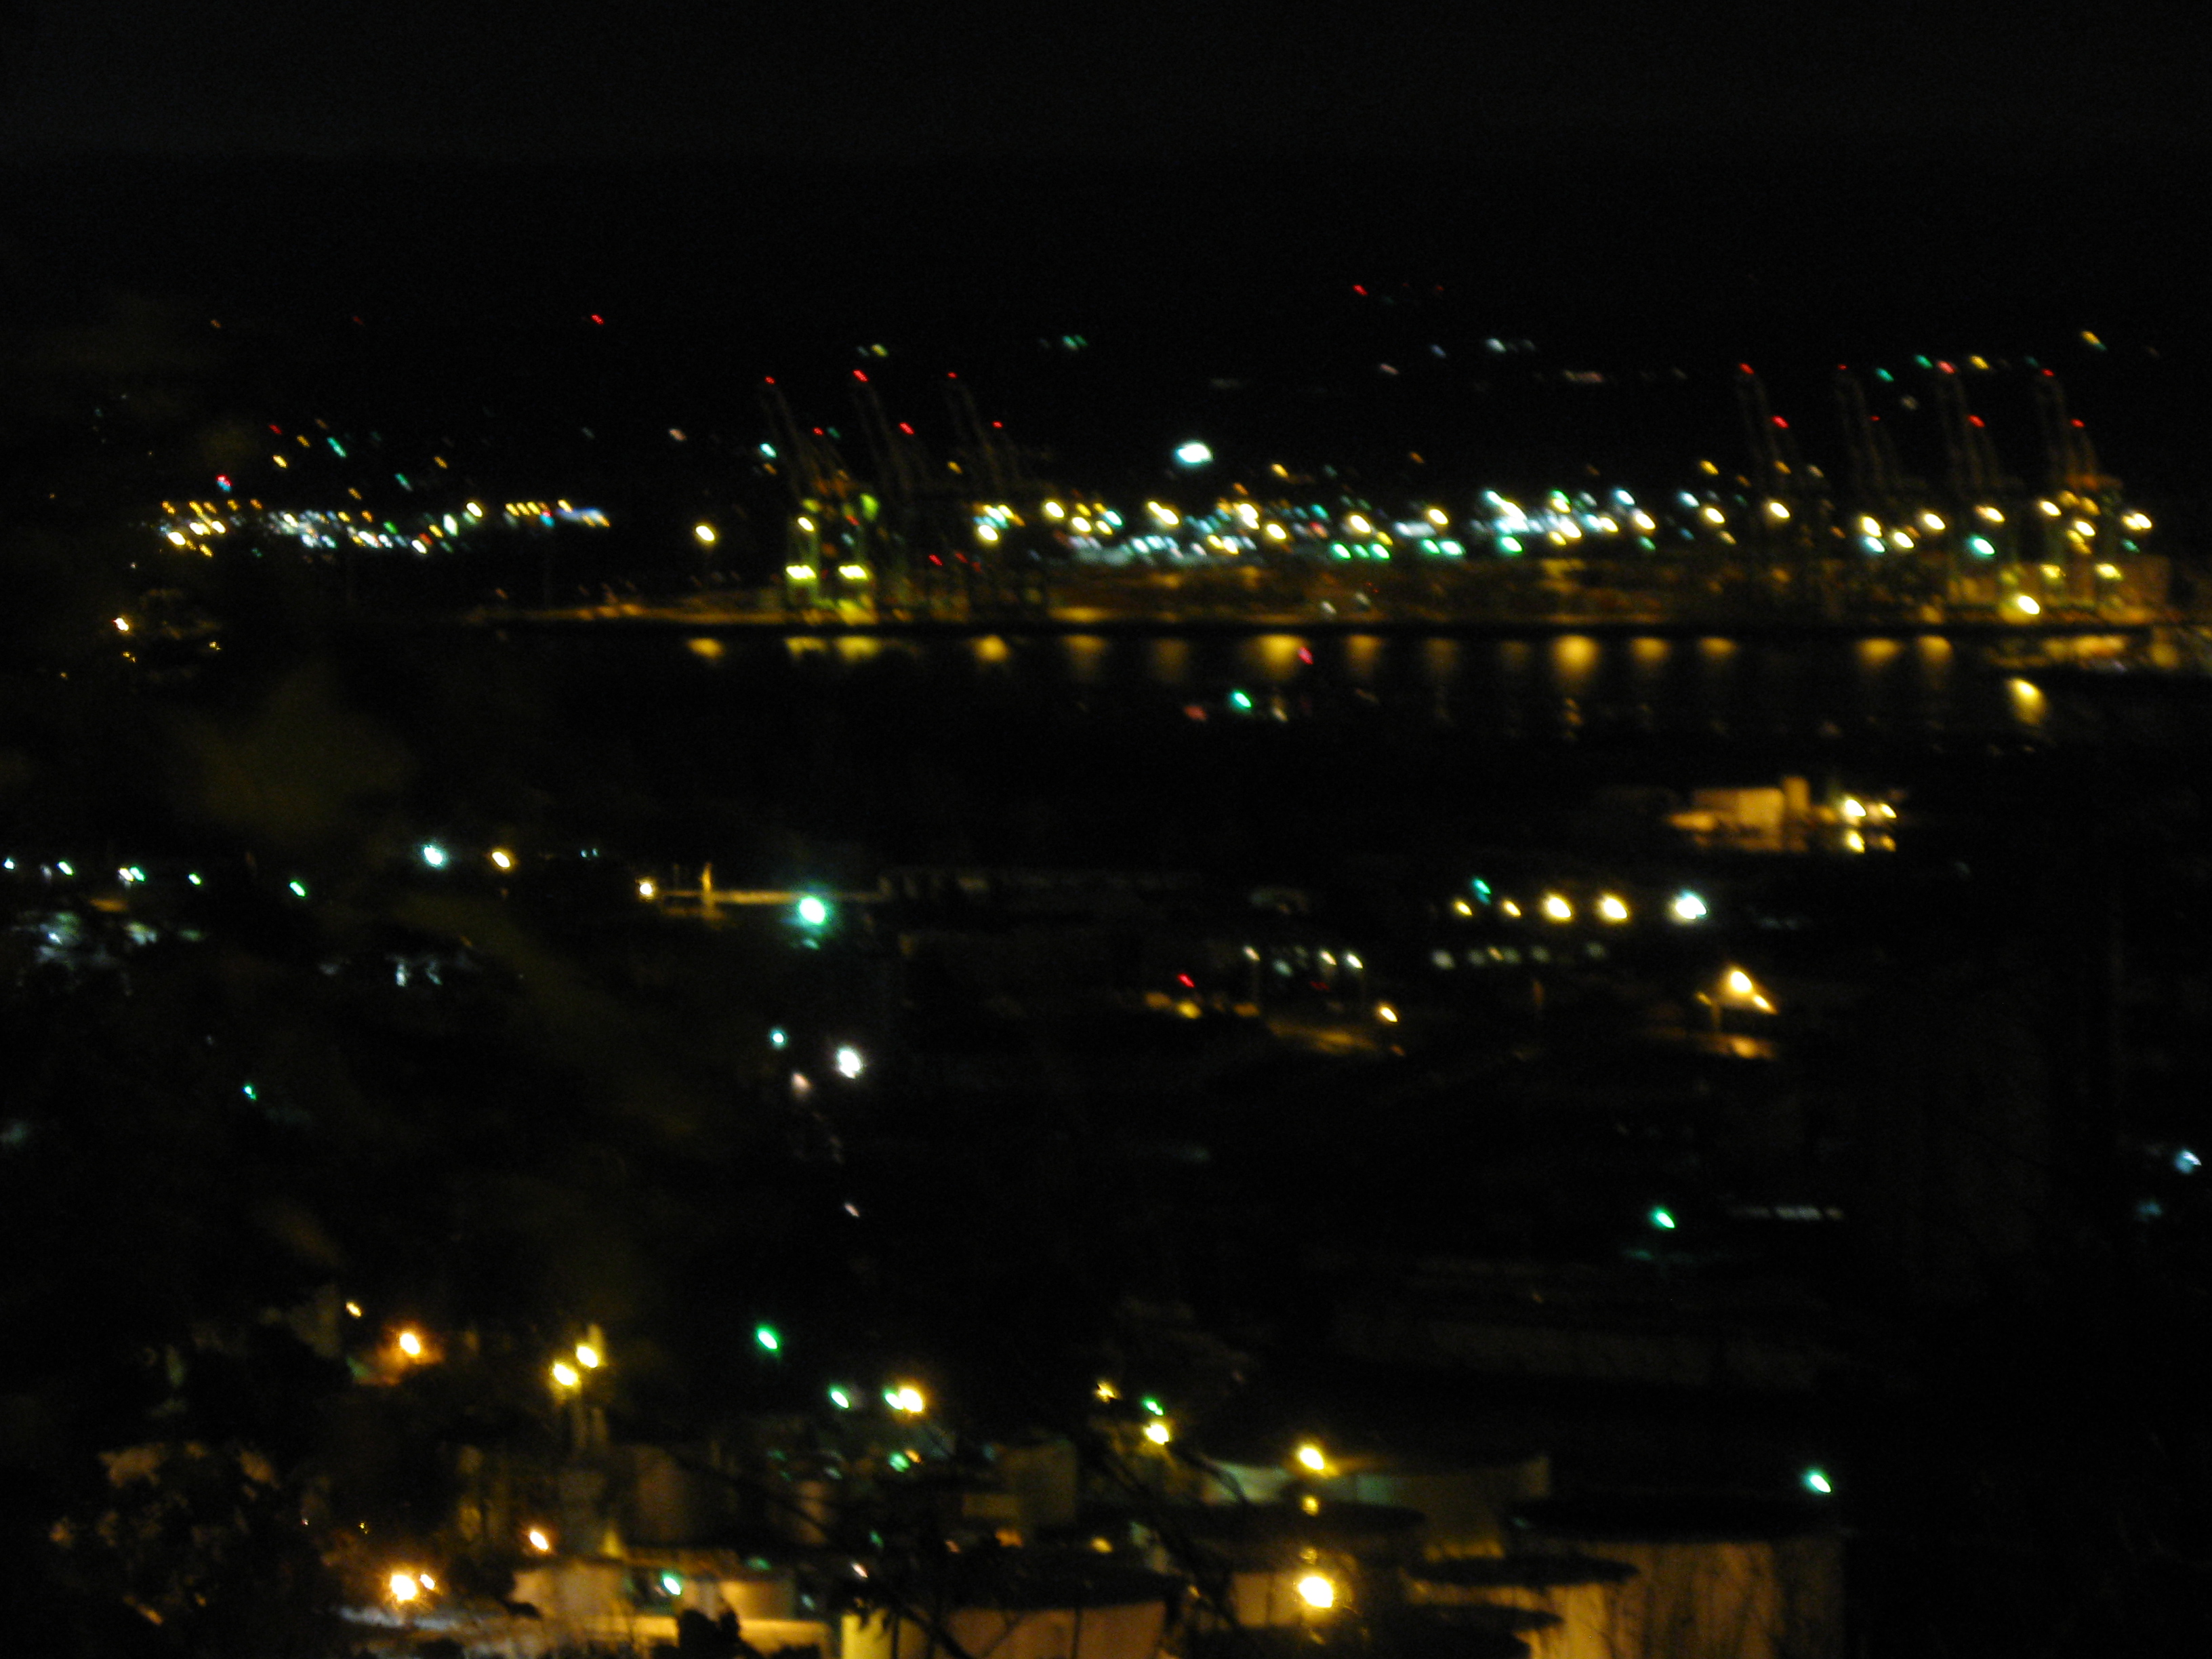 City from hillside near missy's place at night 2 photo